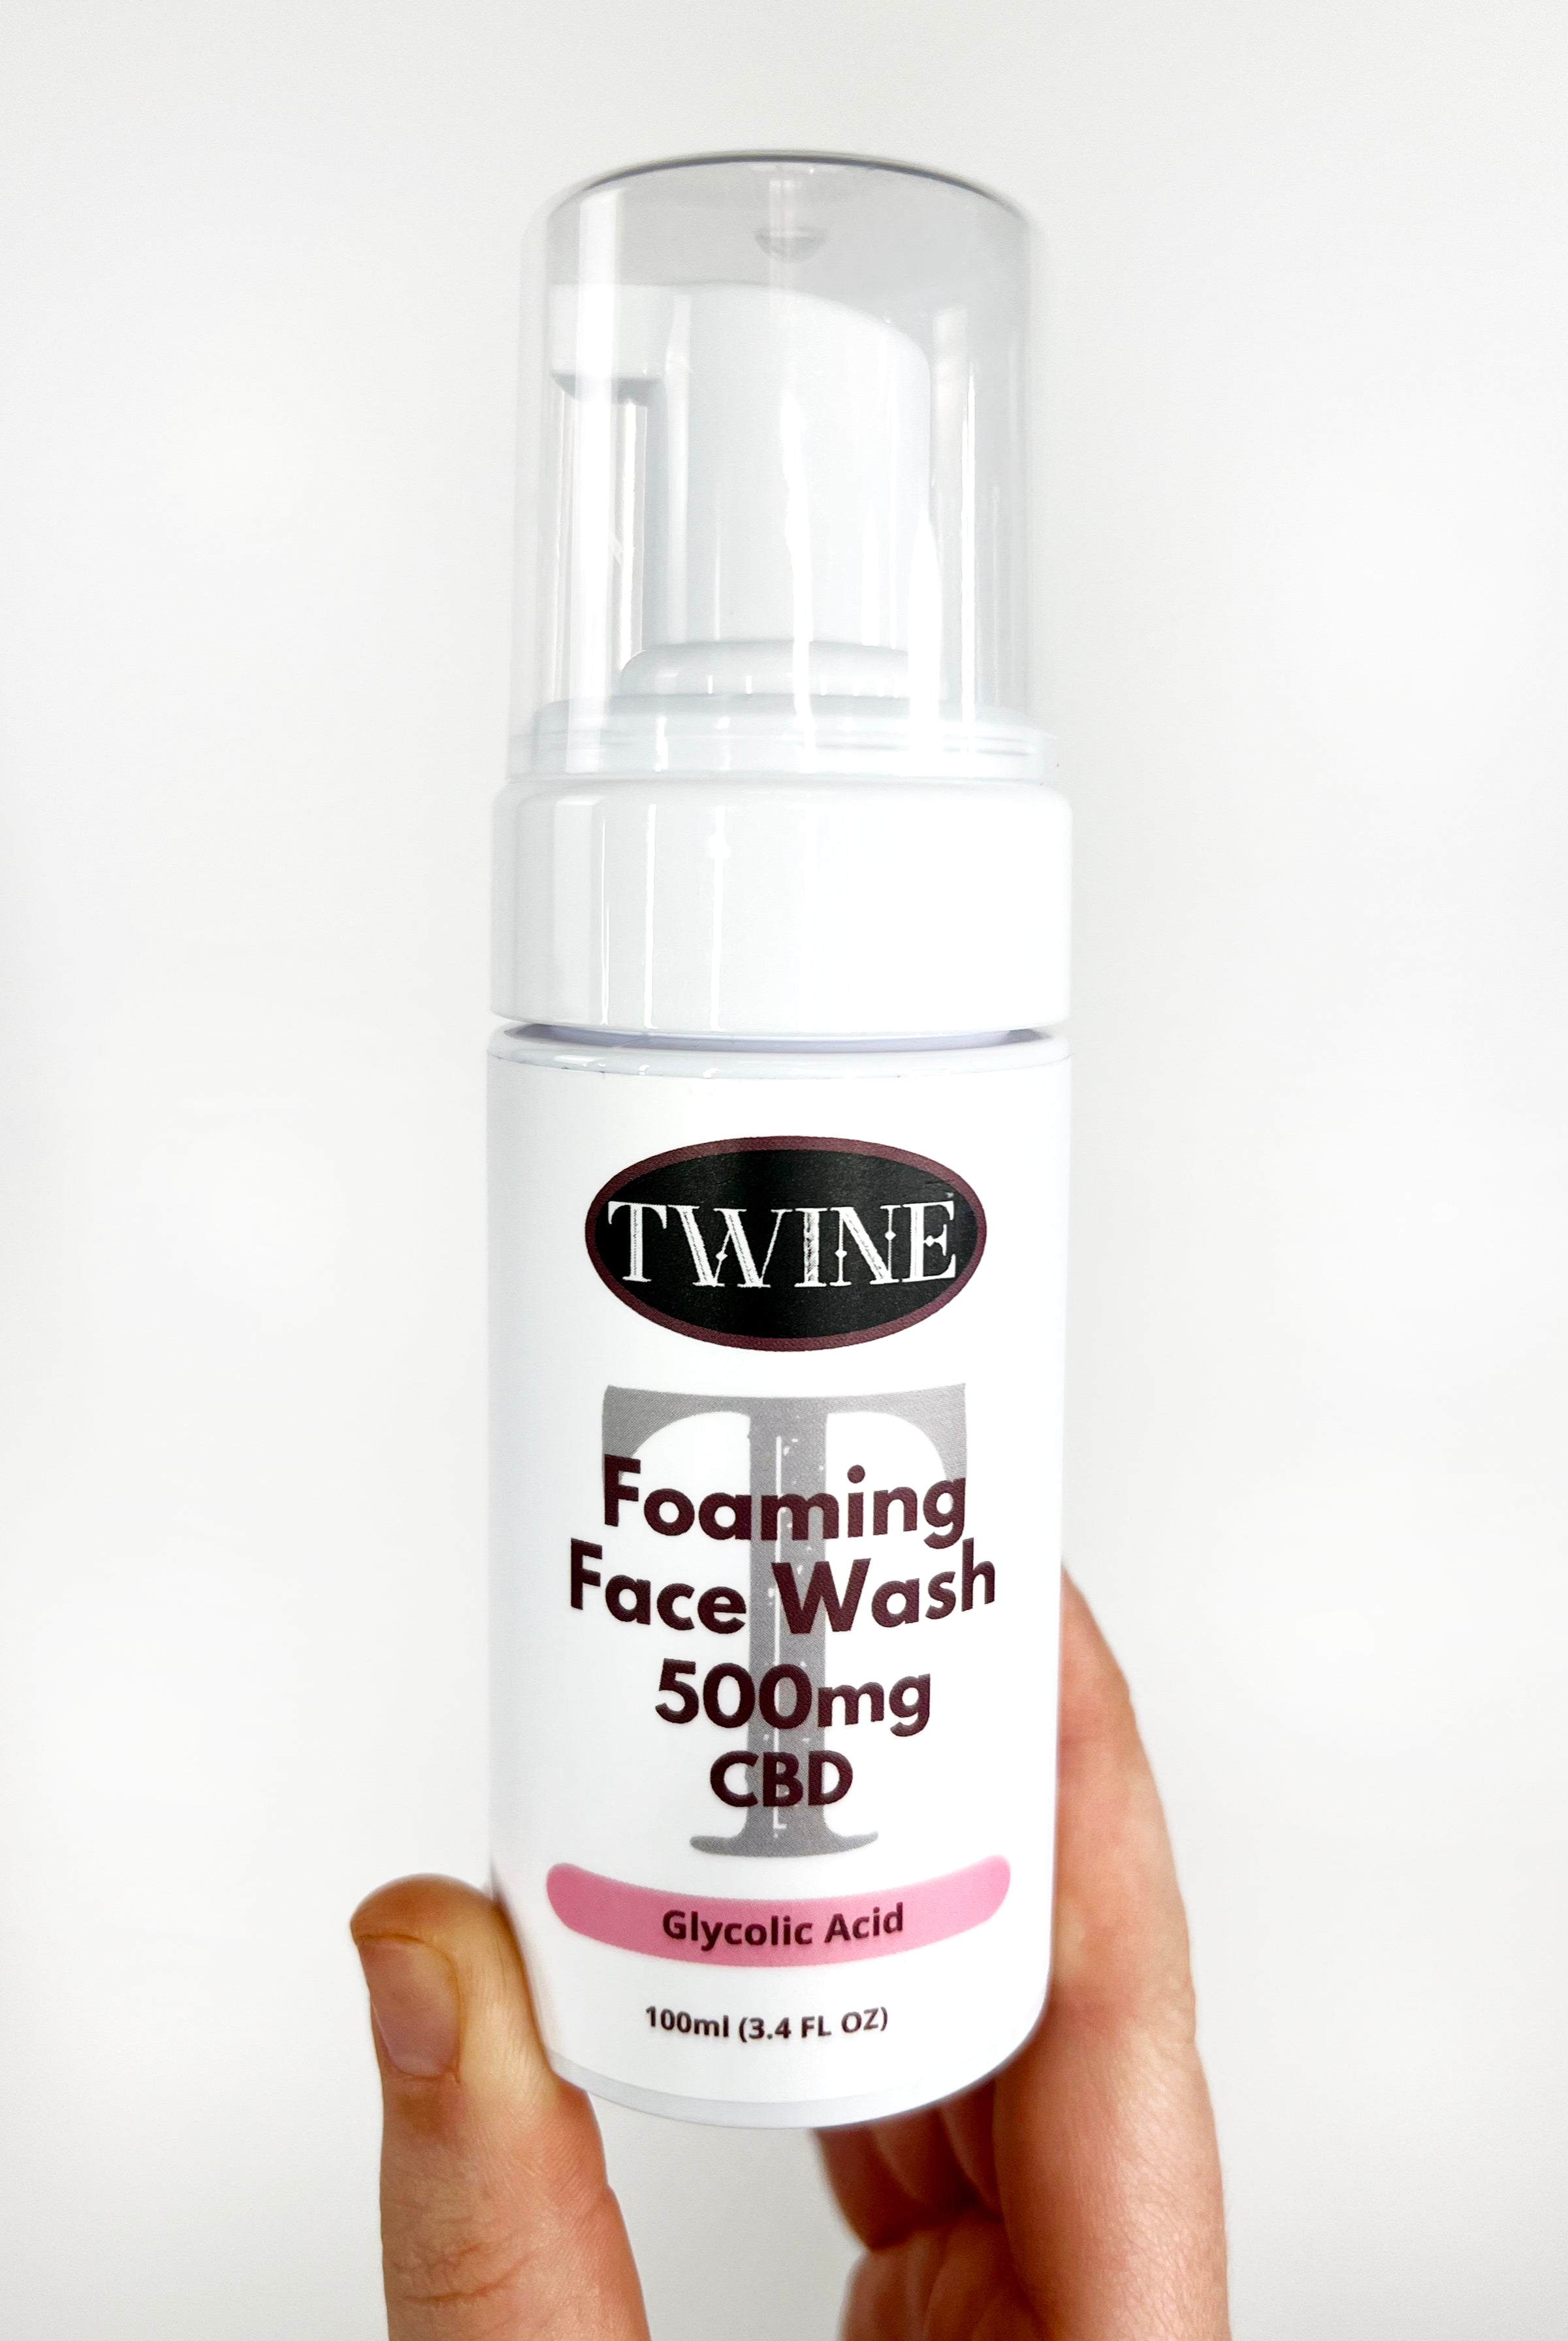 PREORDER: 500mg CBD Foaming Face Wash with Glycolic Acid 100ml-340 Other Accessories-Twine-Heathered Boho Boutique, Women's Fashion and Accessories in Palmetto, FL